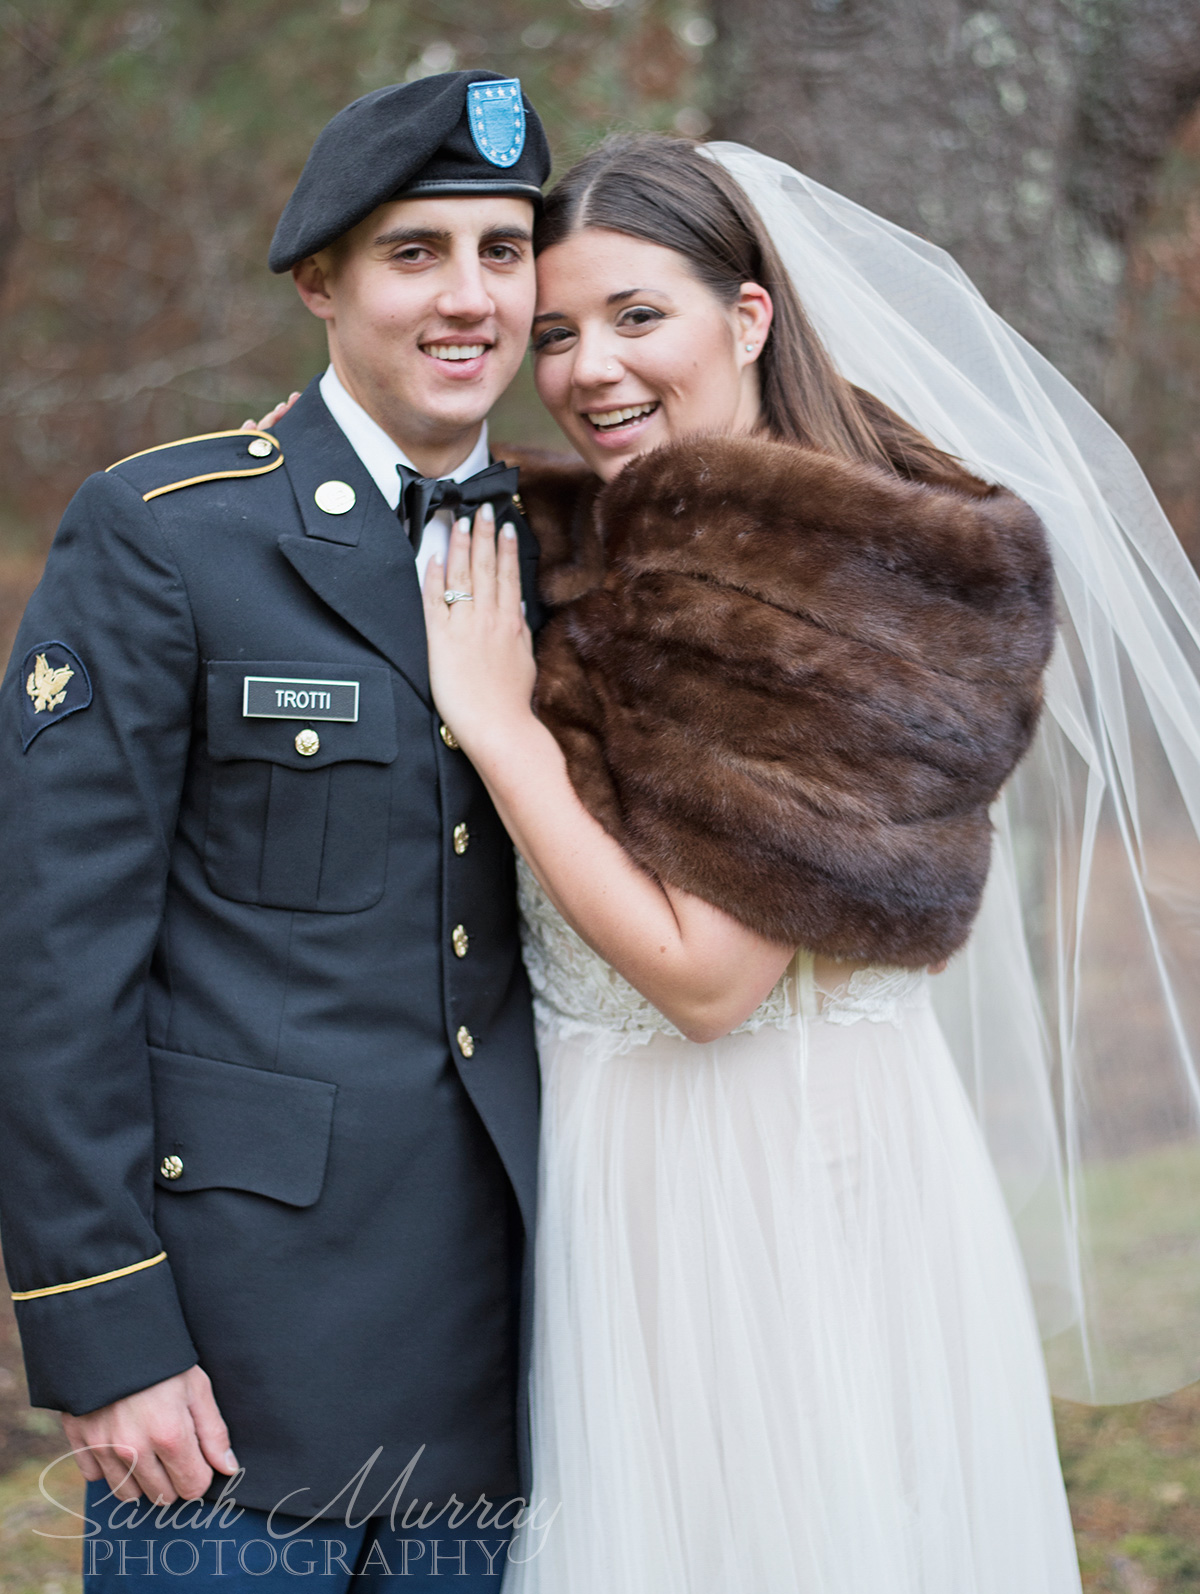 Private Winter Holiday Cape Cod Wedding in Cotuit, Massachusetts - Sarah Murray Photography